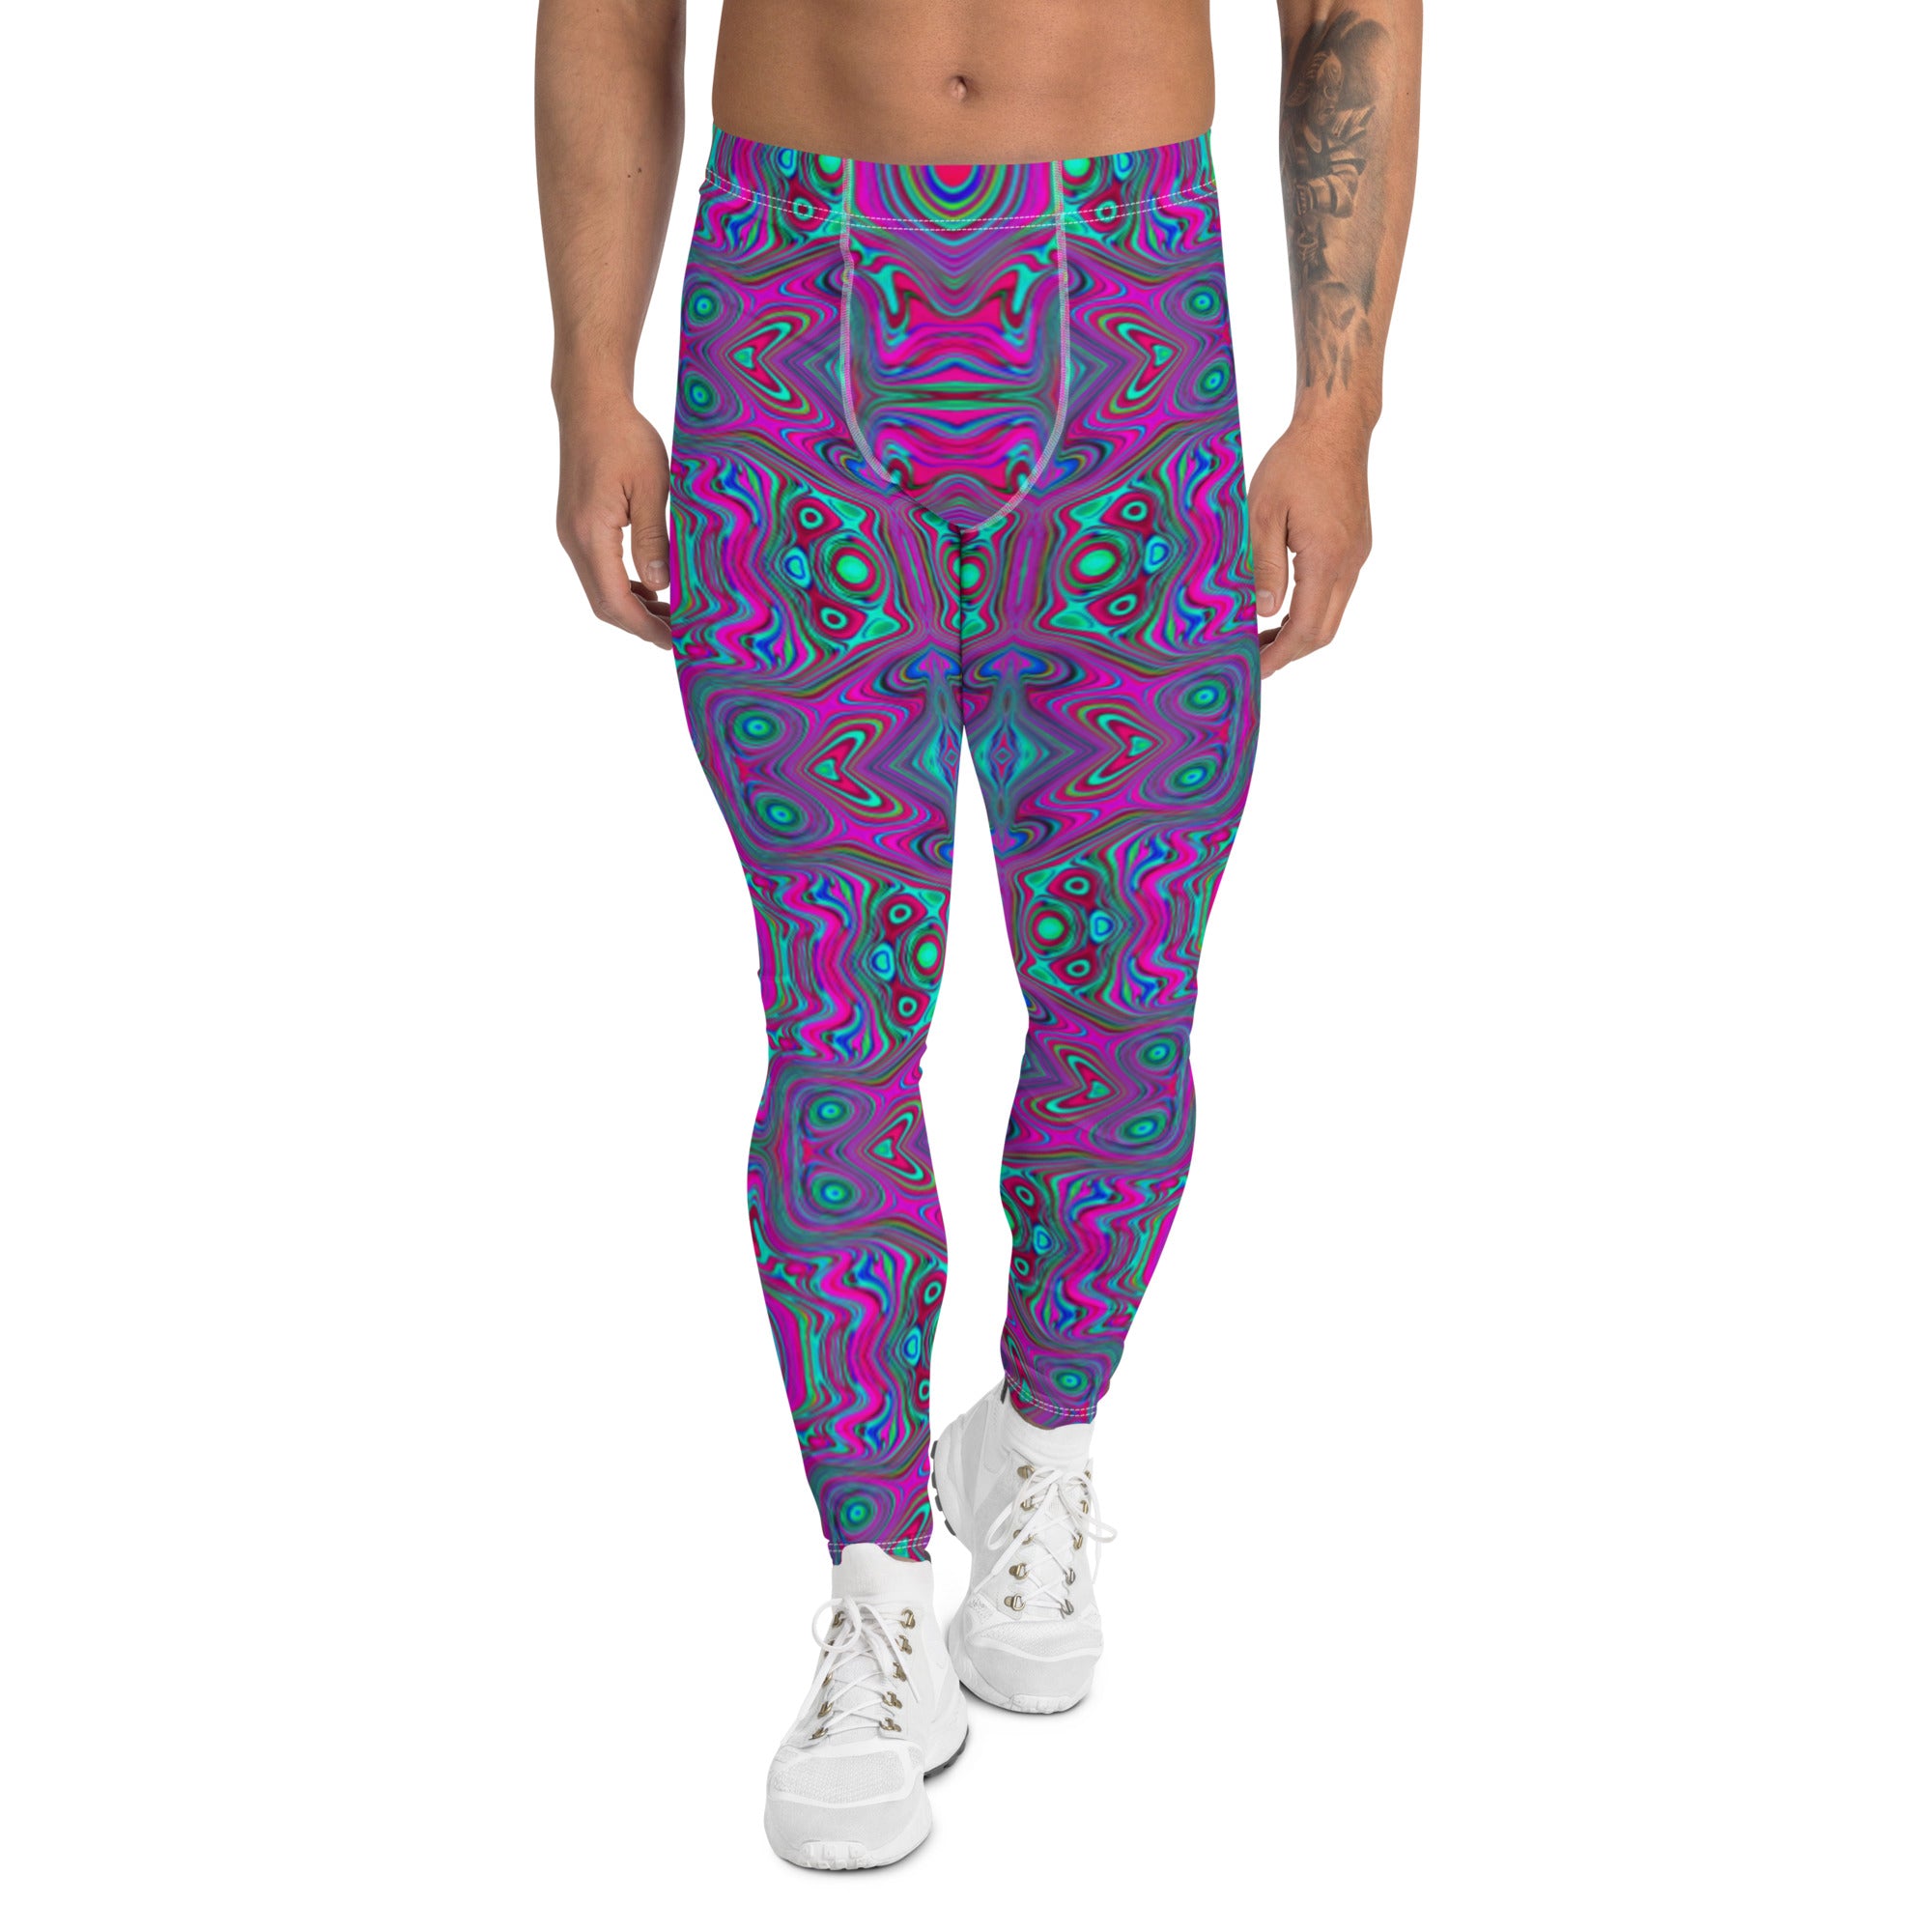 Men's Leggings, Trippy Retro Magenta, Blue and Green Abstract